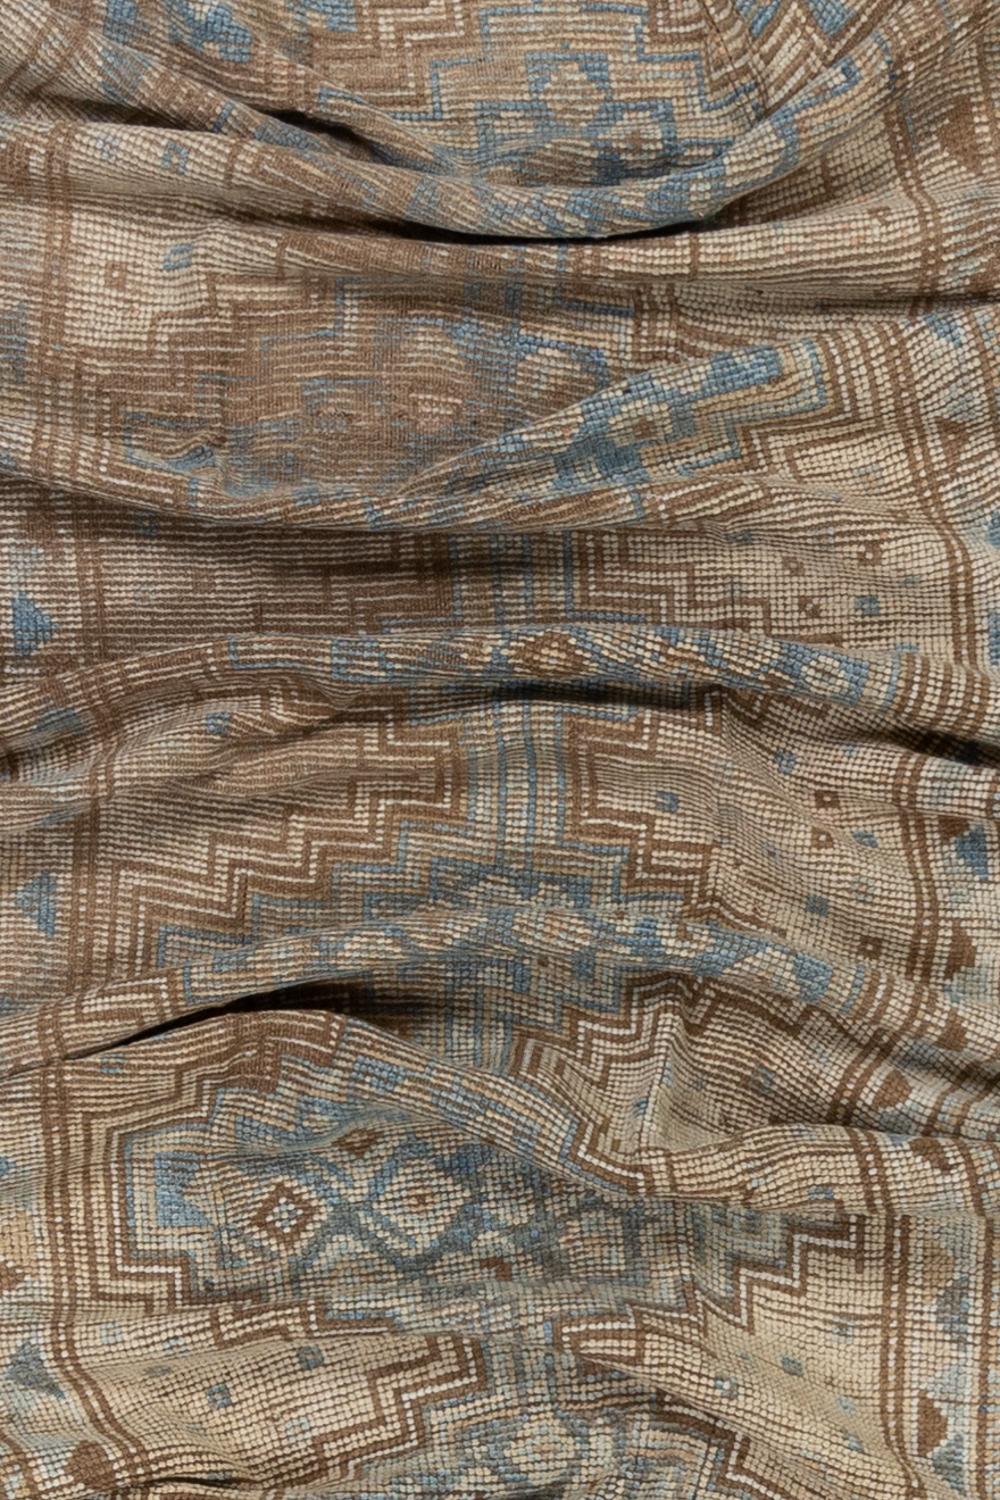 Age: 120 years

Colors: tan, blue

Pile: low-medium 

Wear Notes: 3-4

Material: wool on wool

Gorgeous old wool on wool runner with a warm tan field and blue medallion. Soft underfoot and incredibly textural. 

Wear Guide:
Vintage and antique rugs